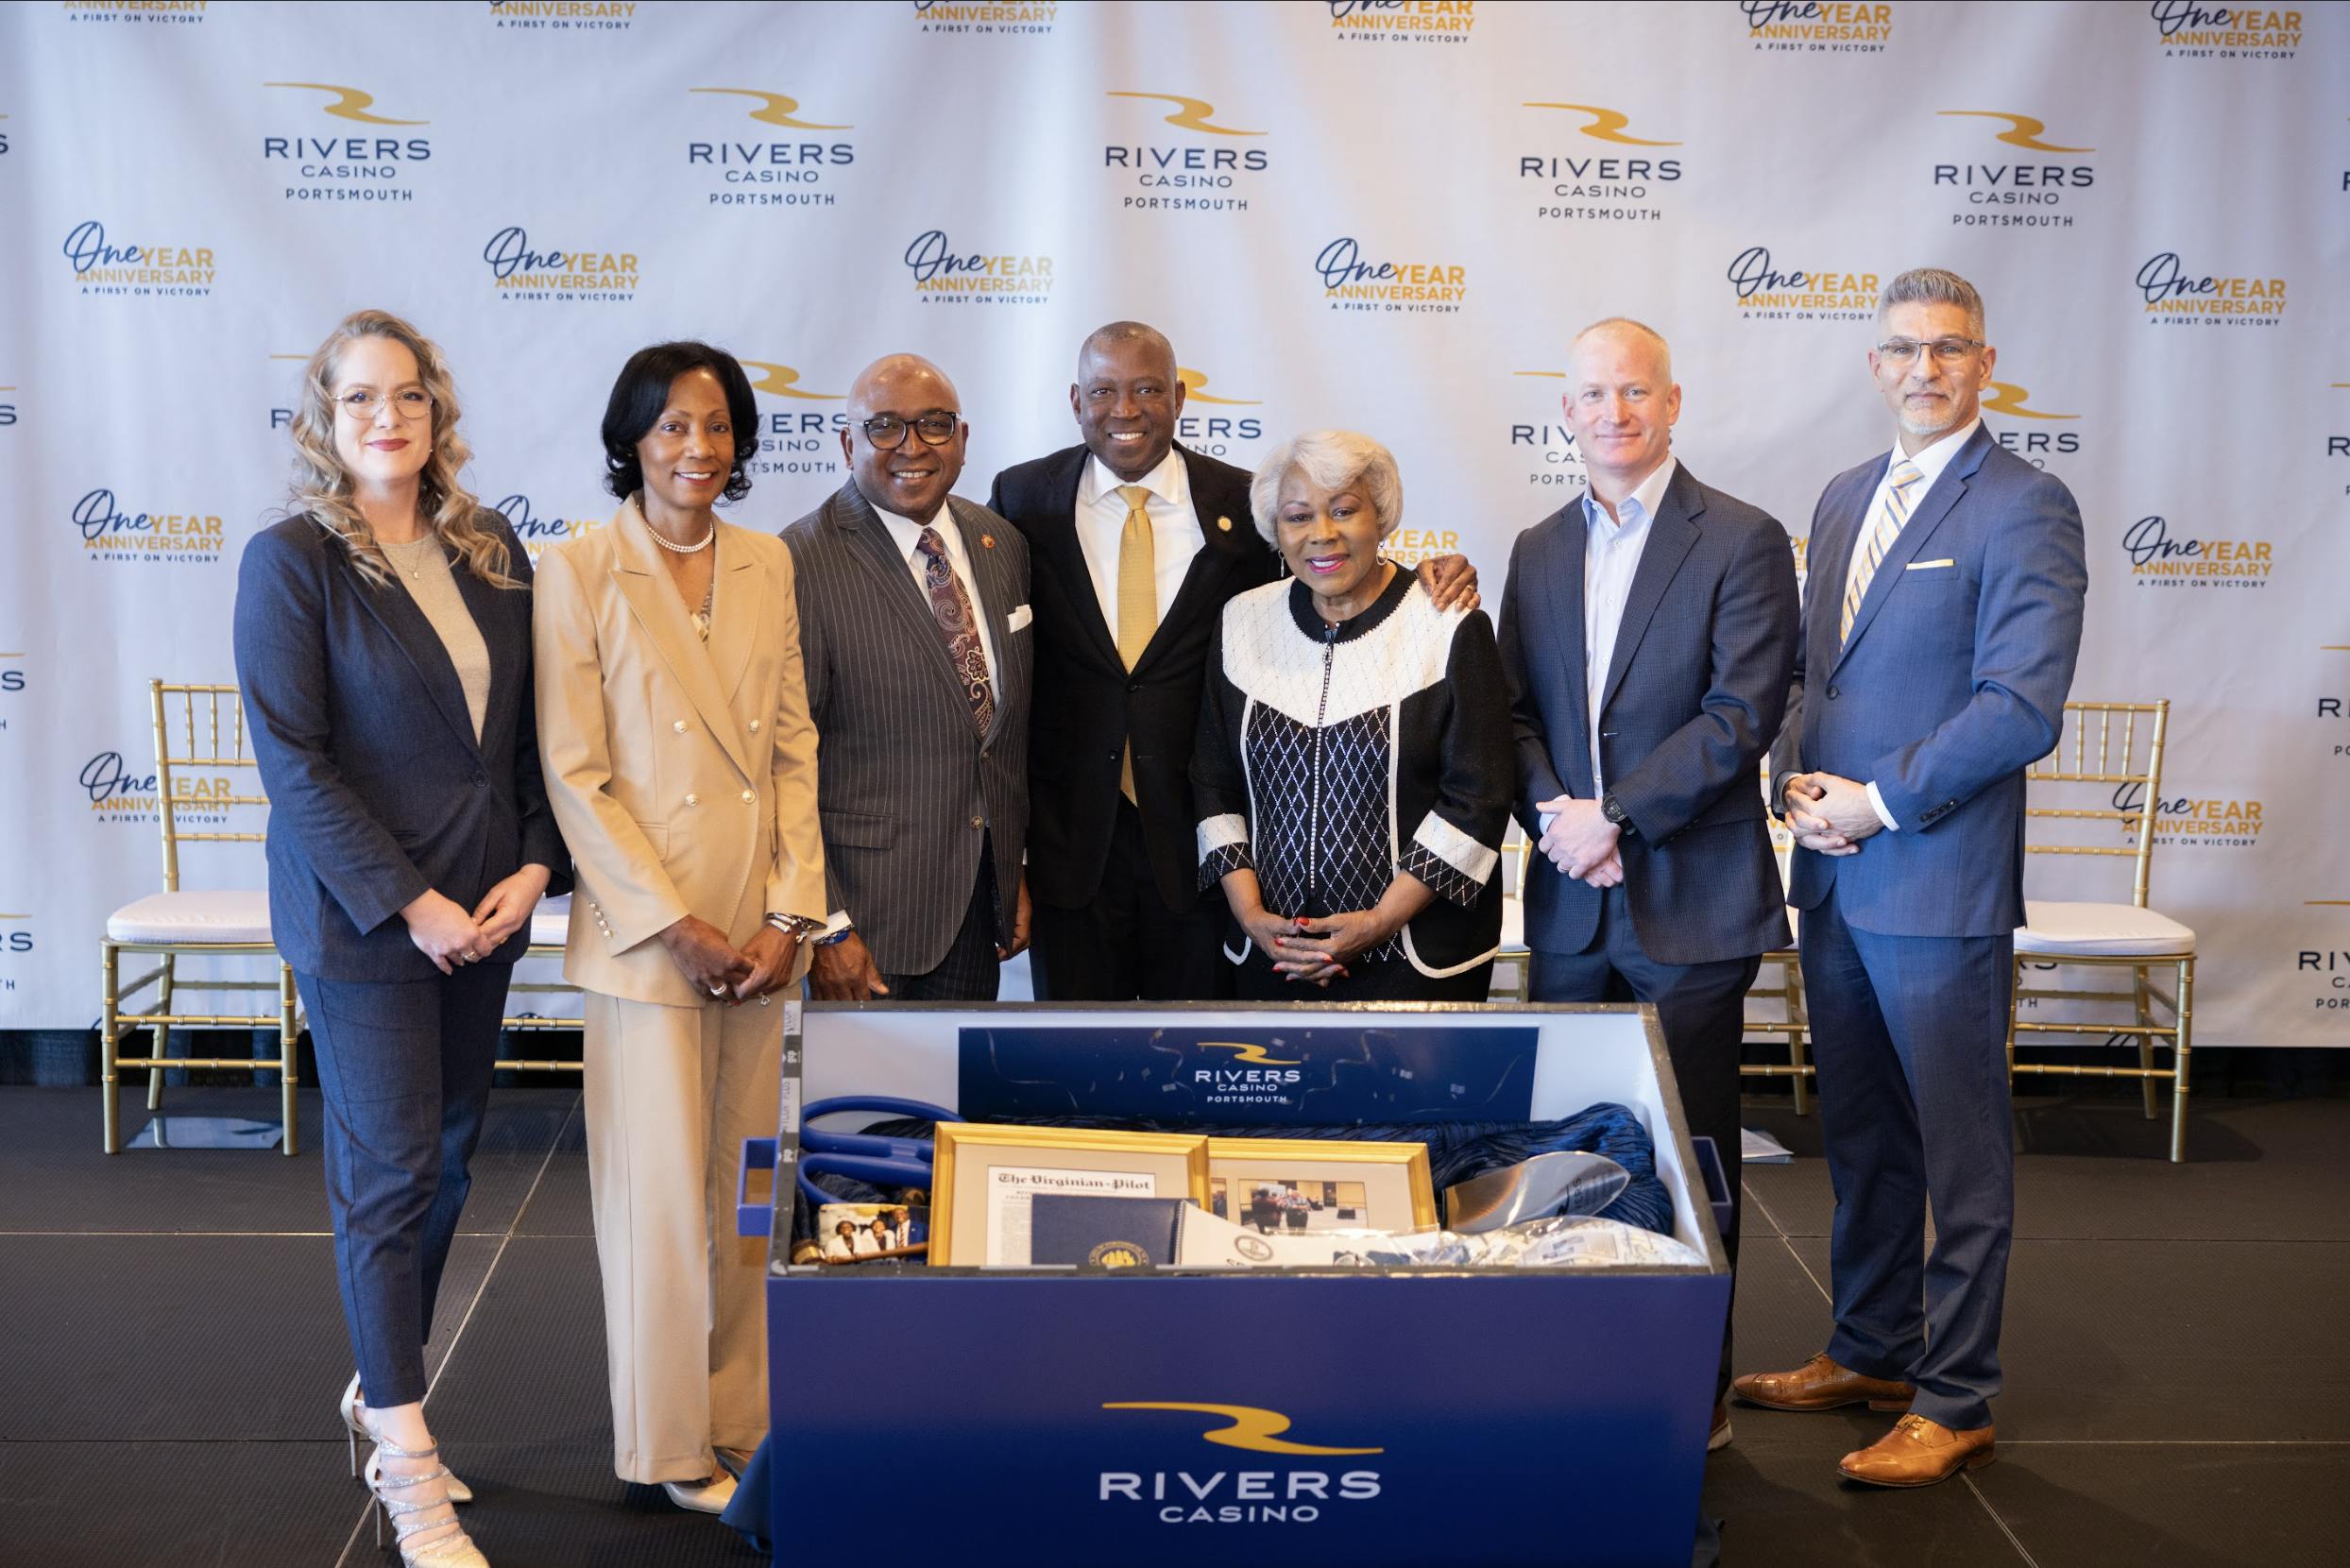 RIVERS CASINO PORTSMOUTH CELEBRATES ONE-YEAR ANNIVERSARY R